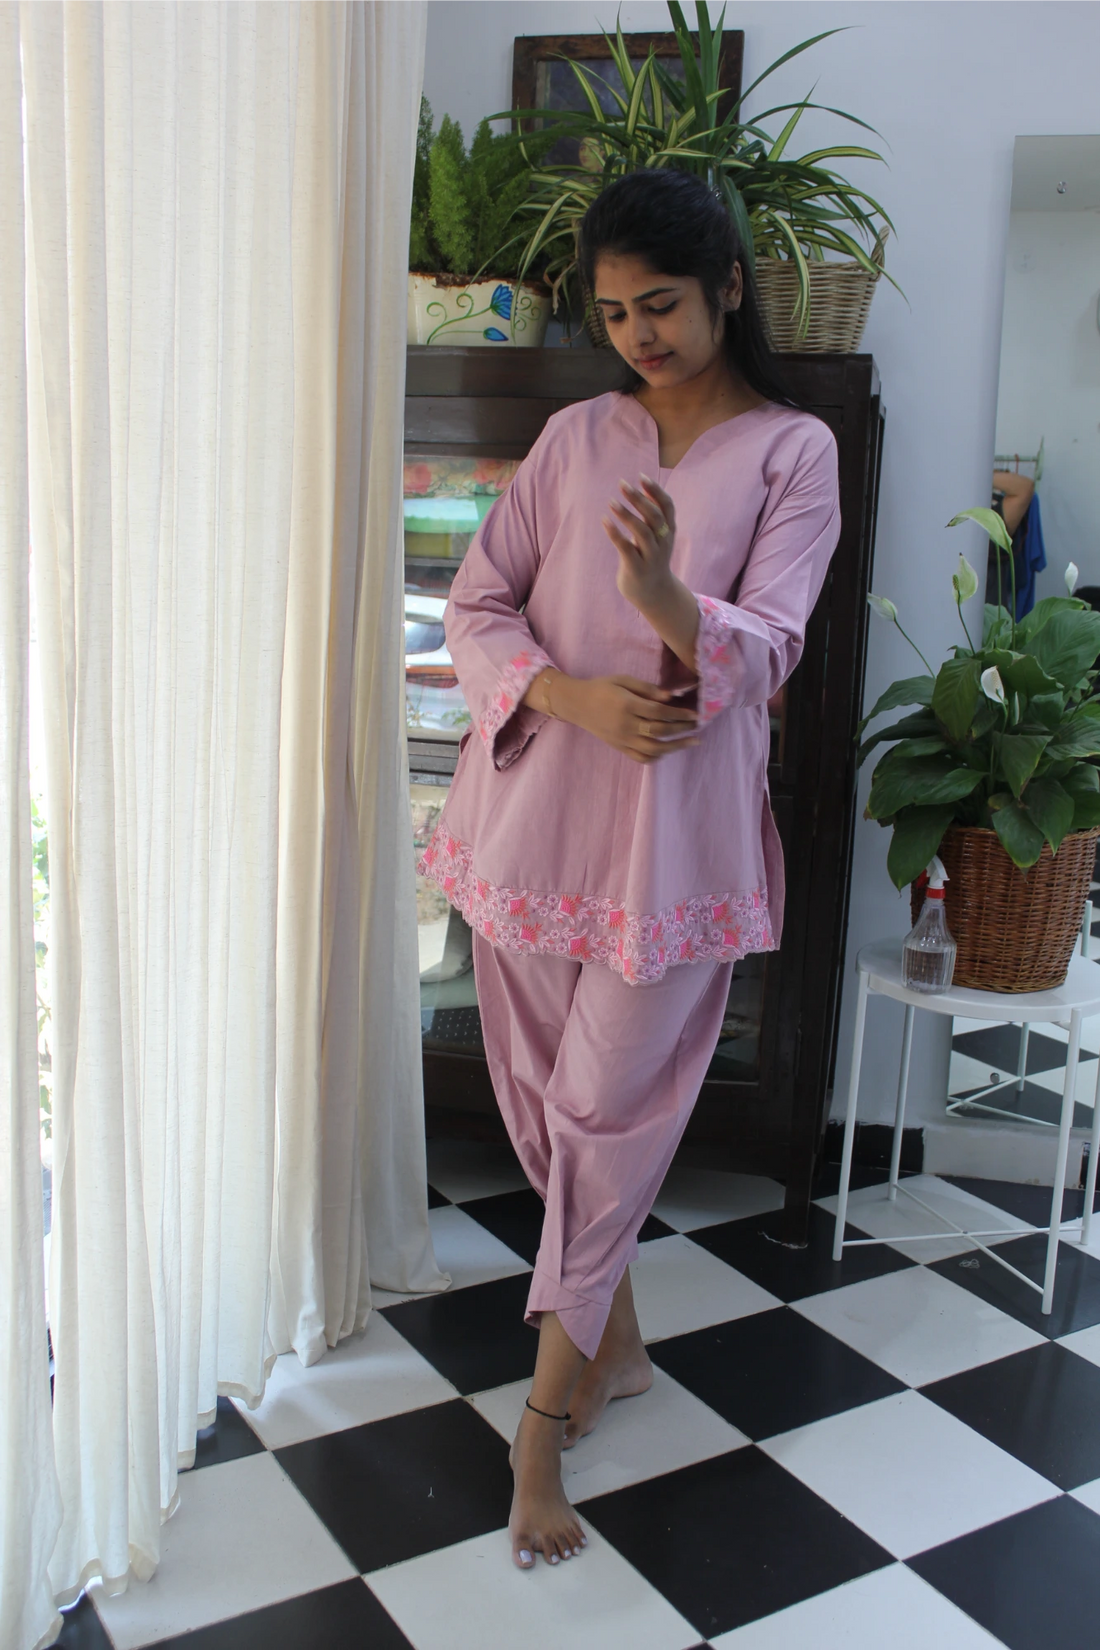 Blush pink co-ord or kurta set with embroidery.